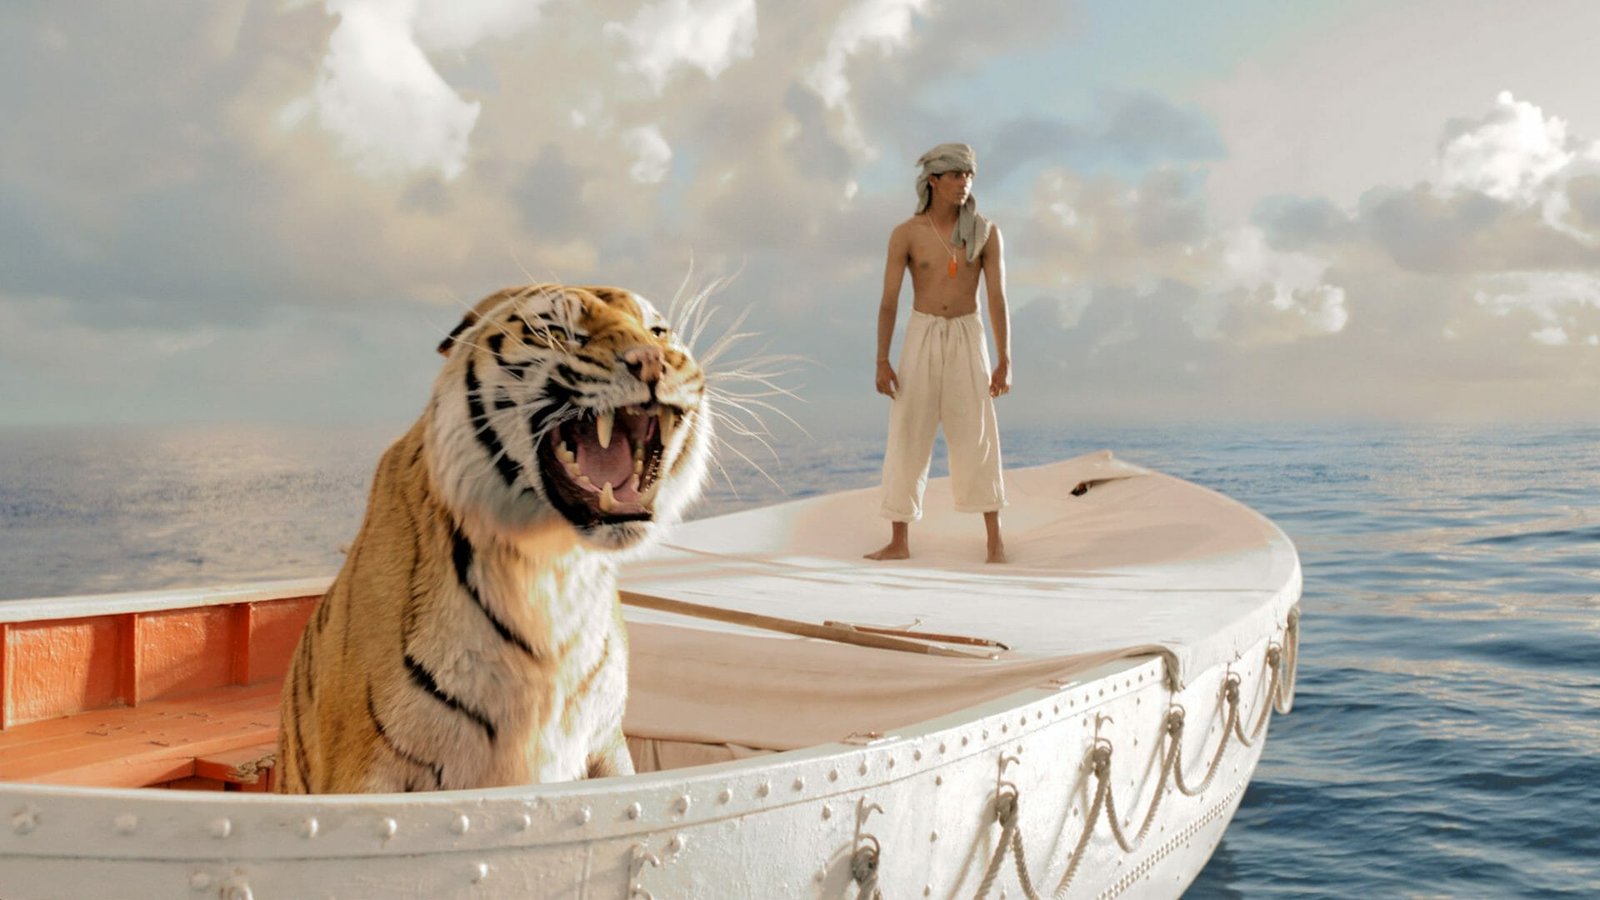 Best Meaningful Movie: Life of Pi (2012)